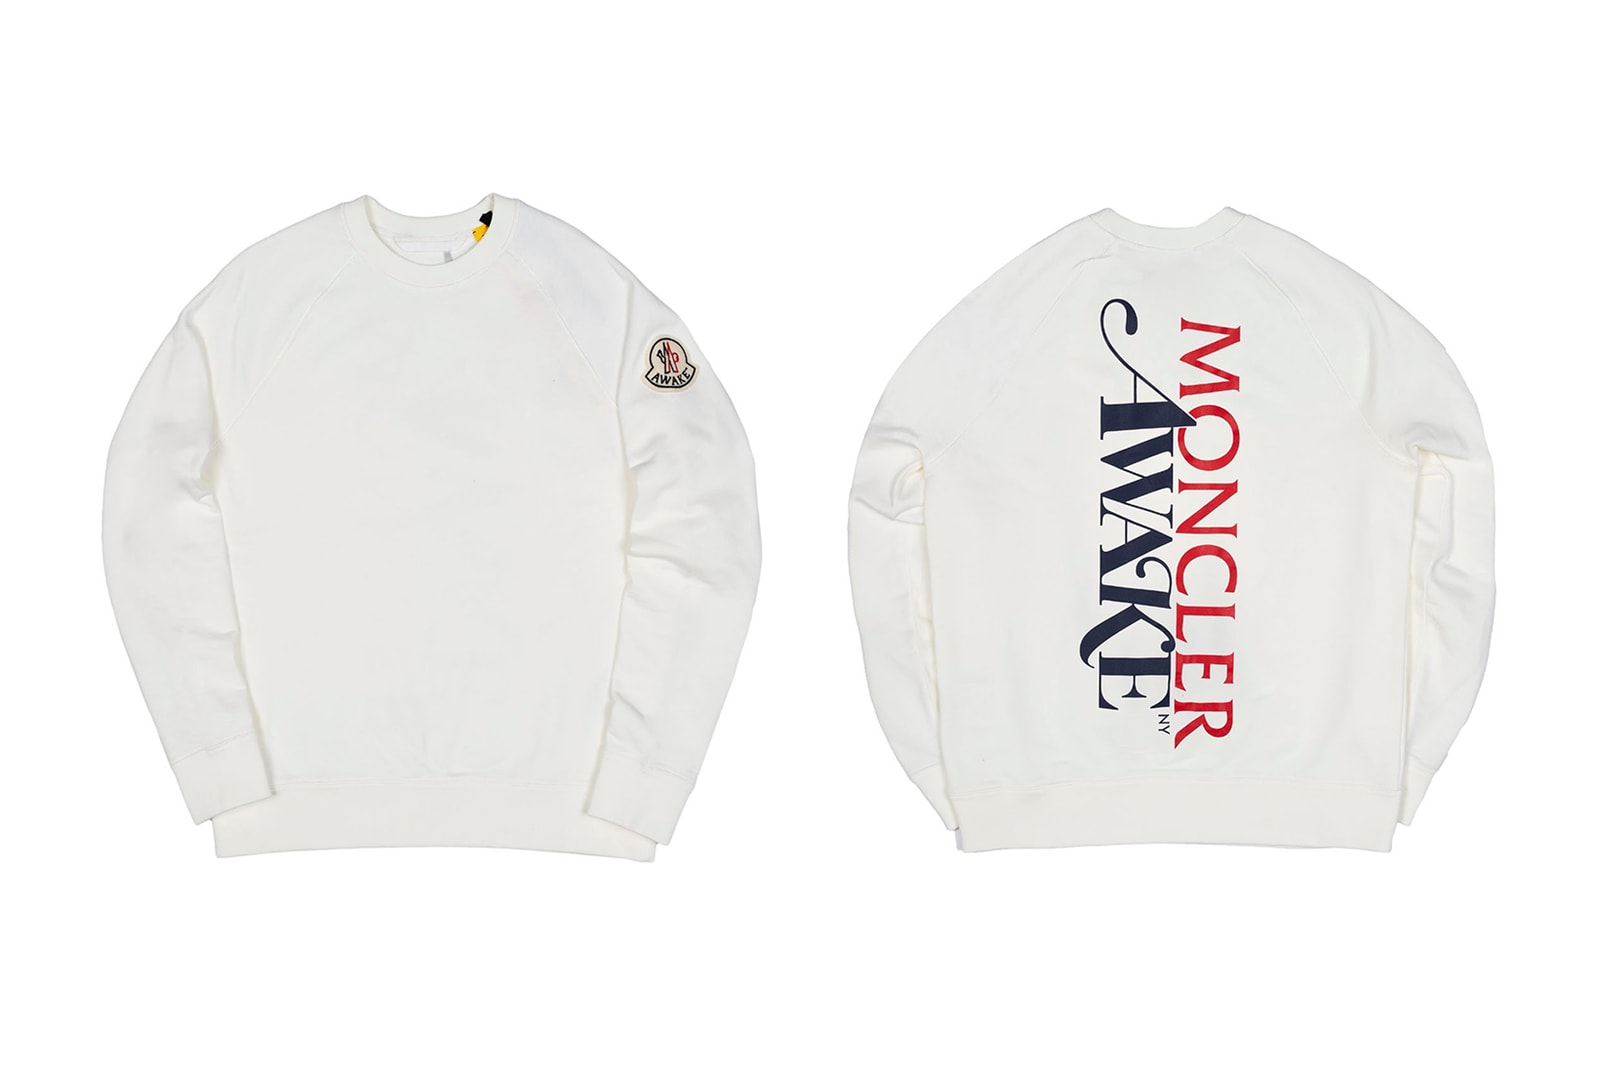 Awake NY x Moncler Collaboration Collection Lookbook